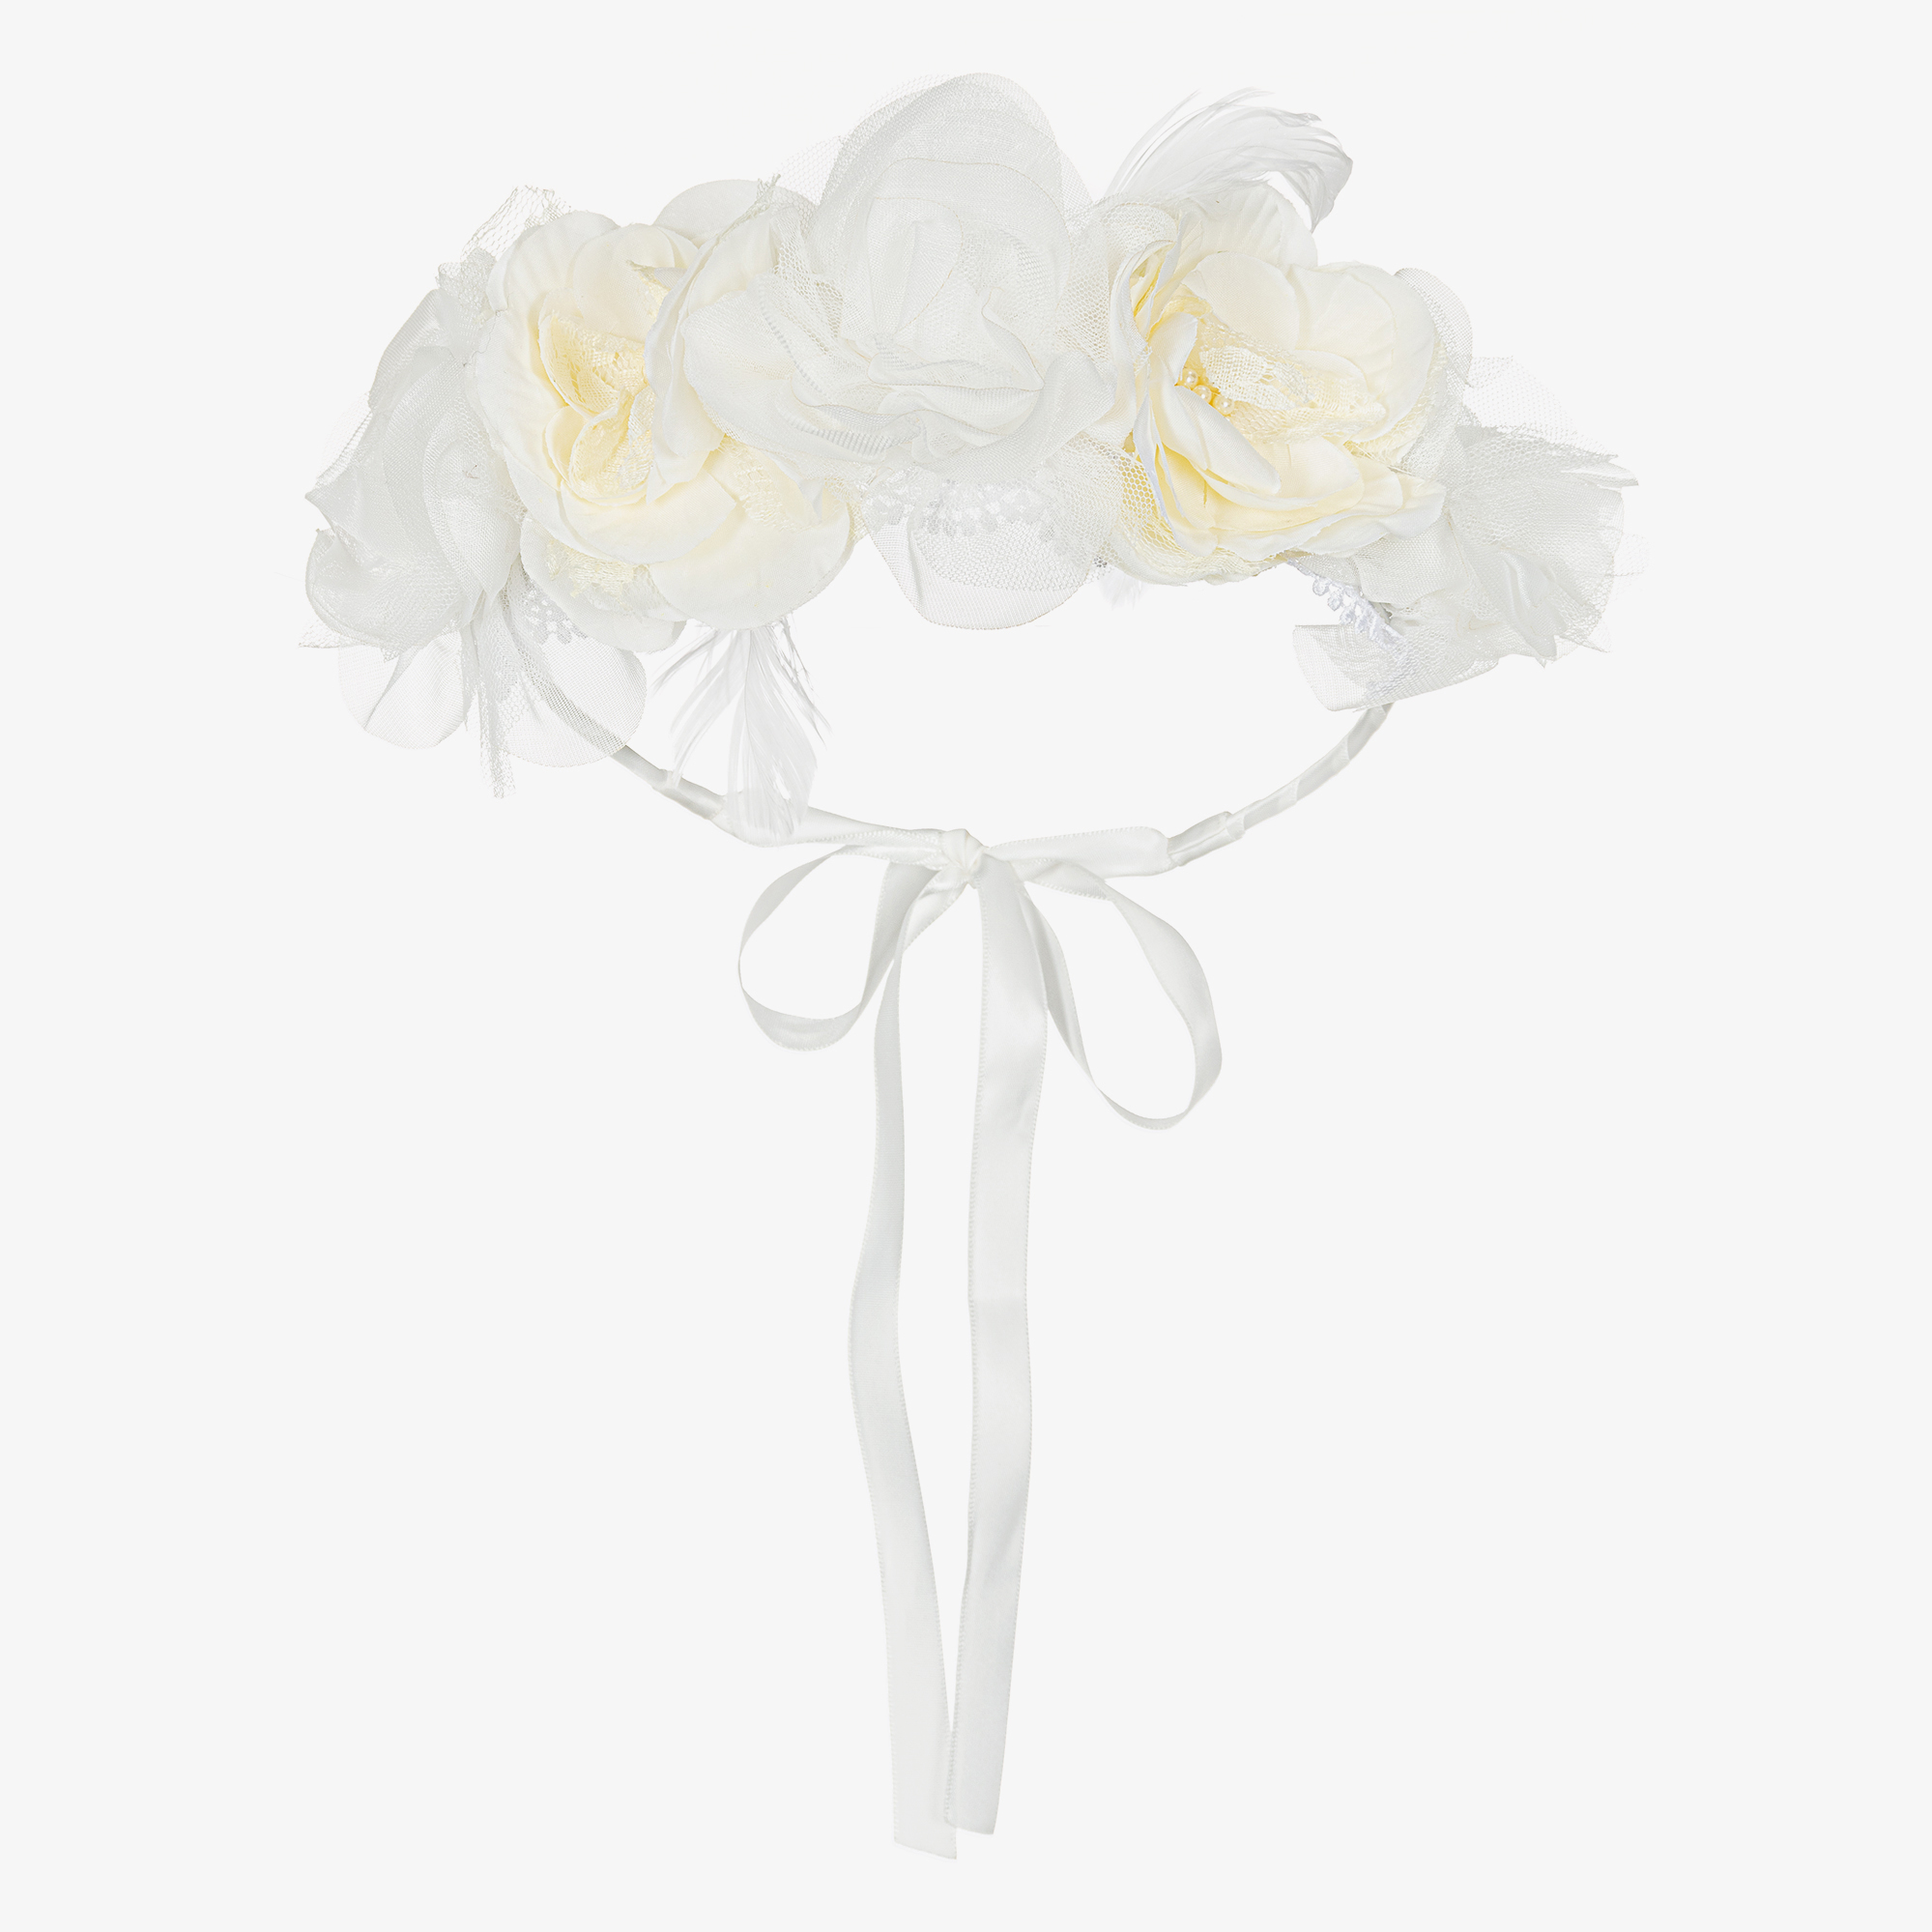 Sienna Likes to Party Accessories  Luxury hair accessories, Flower girl  accessories, Hair garland